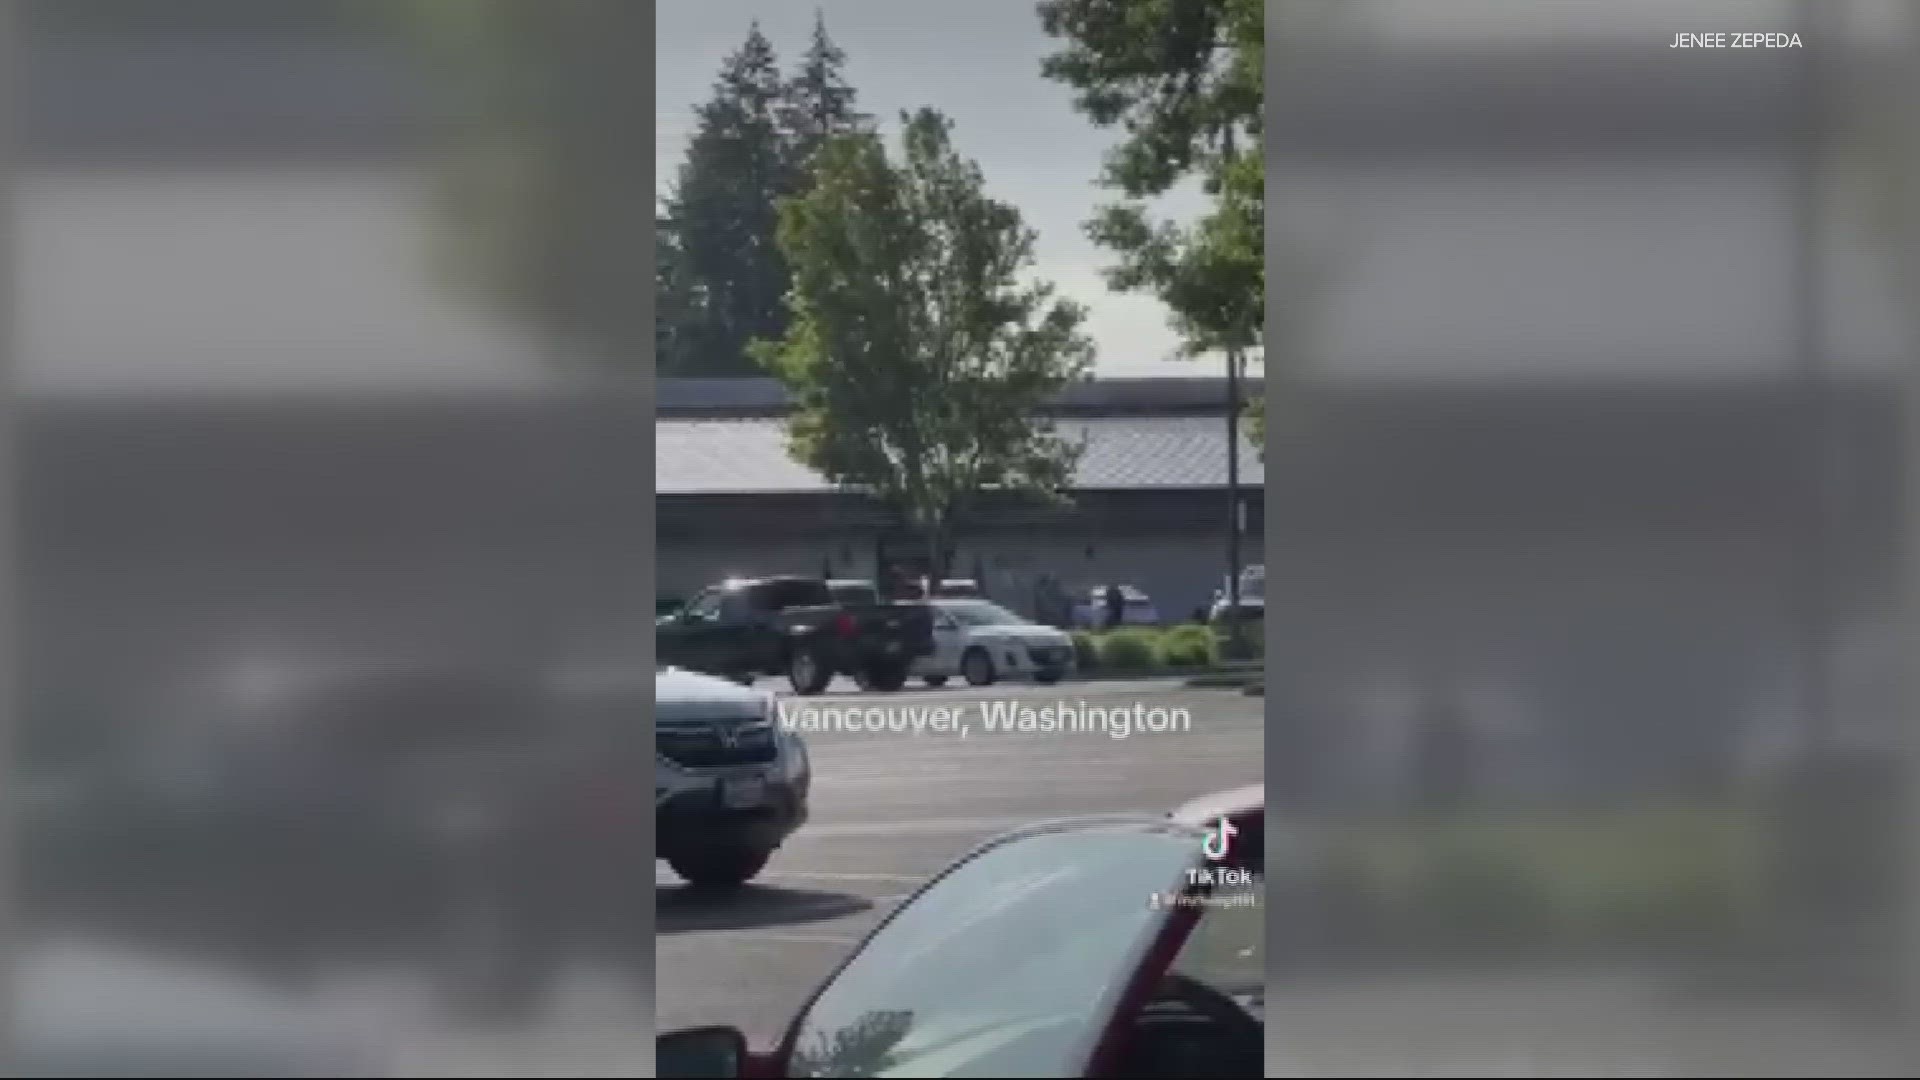 A KGW viewer shared video of a shooting that left an armed robbery suspect dead in a Vancouver Safeway parking lot. The video may be disturbing to watch.